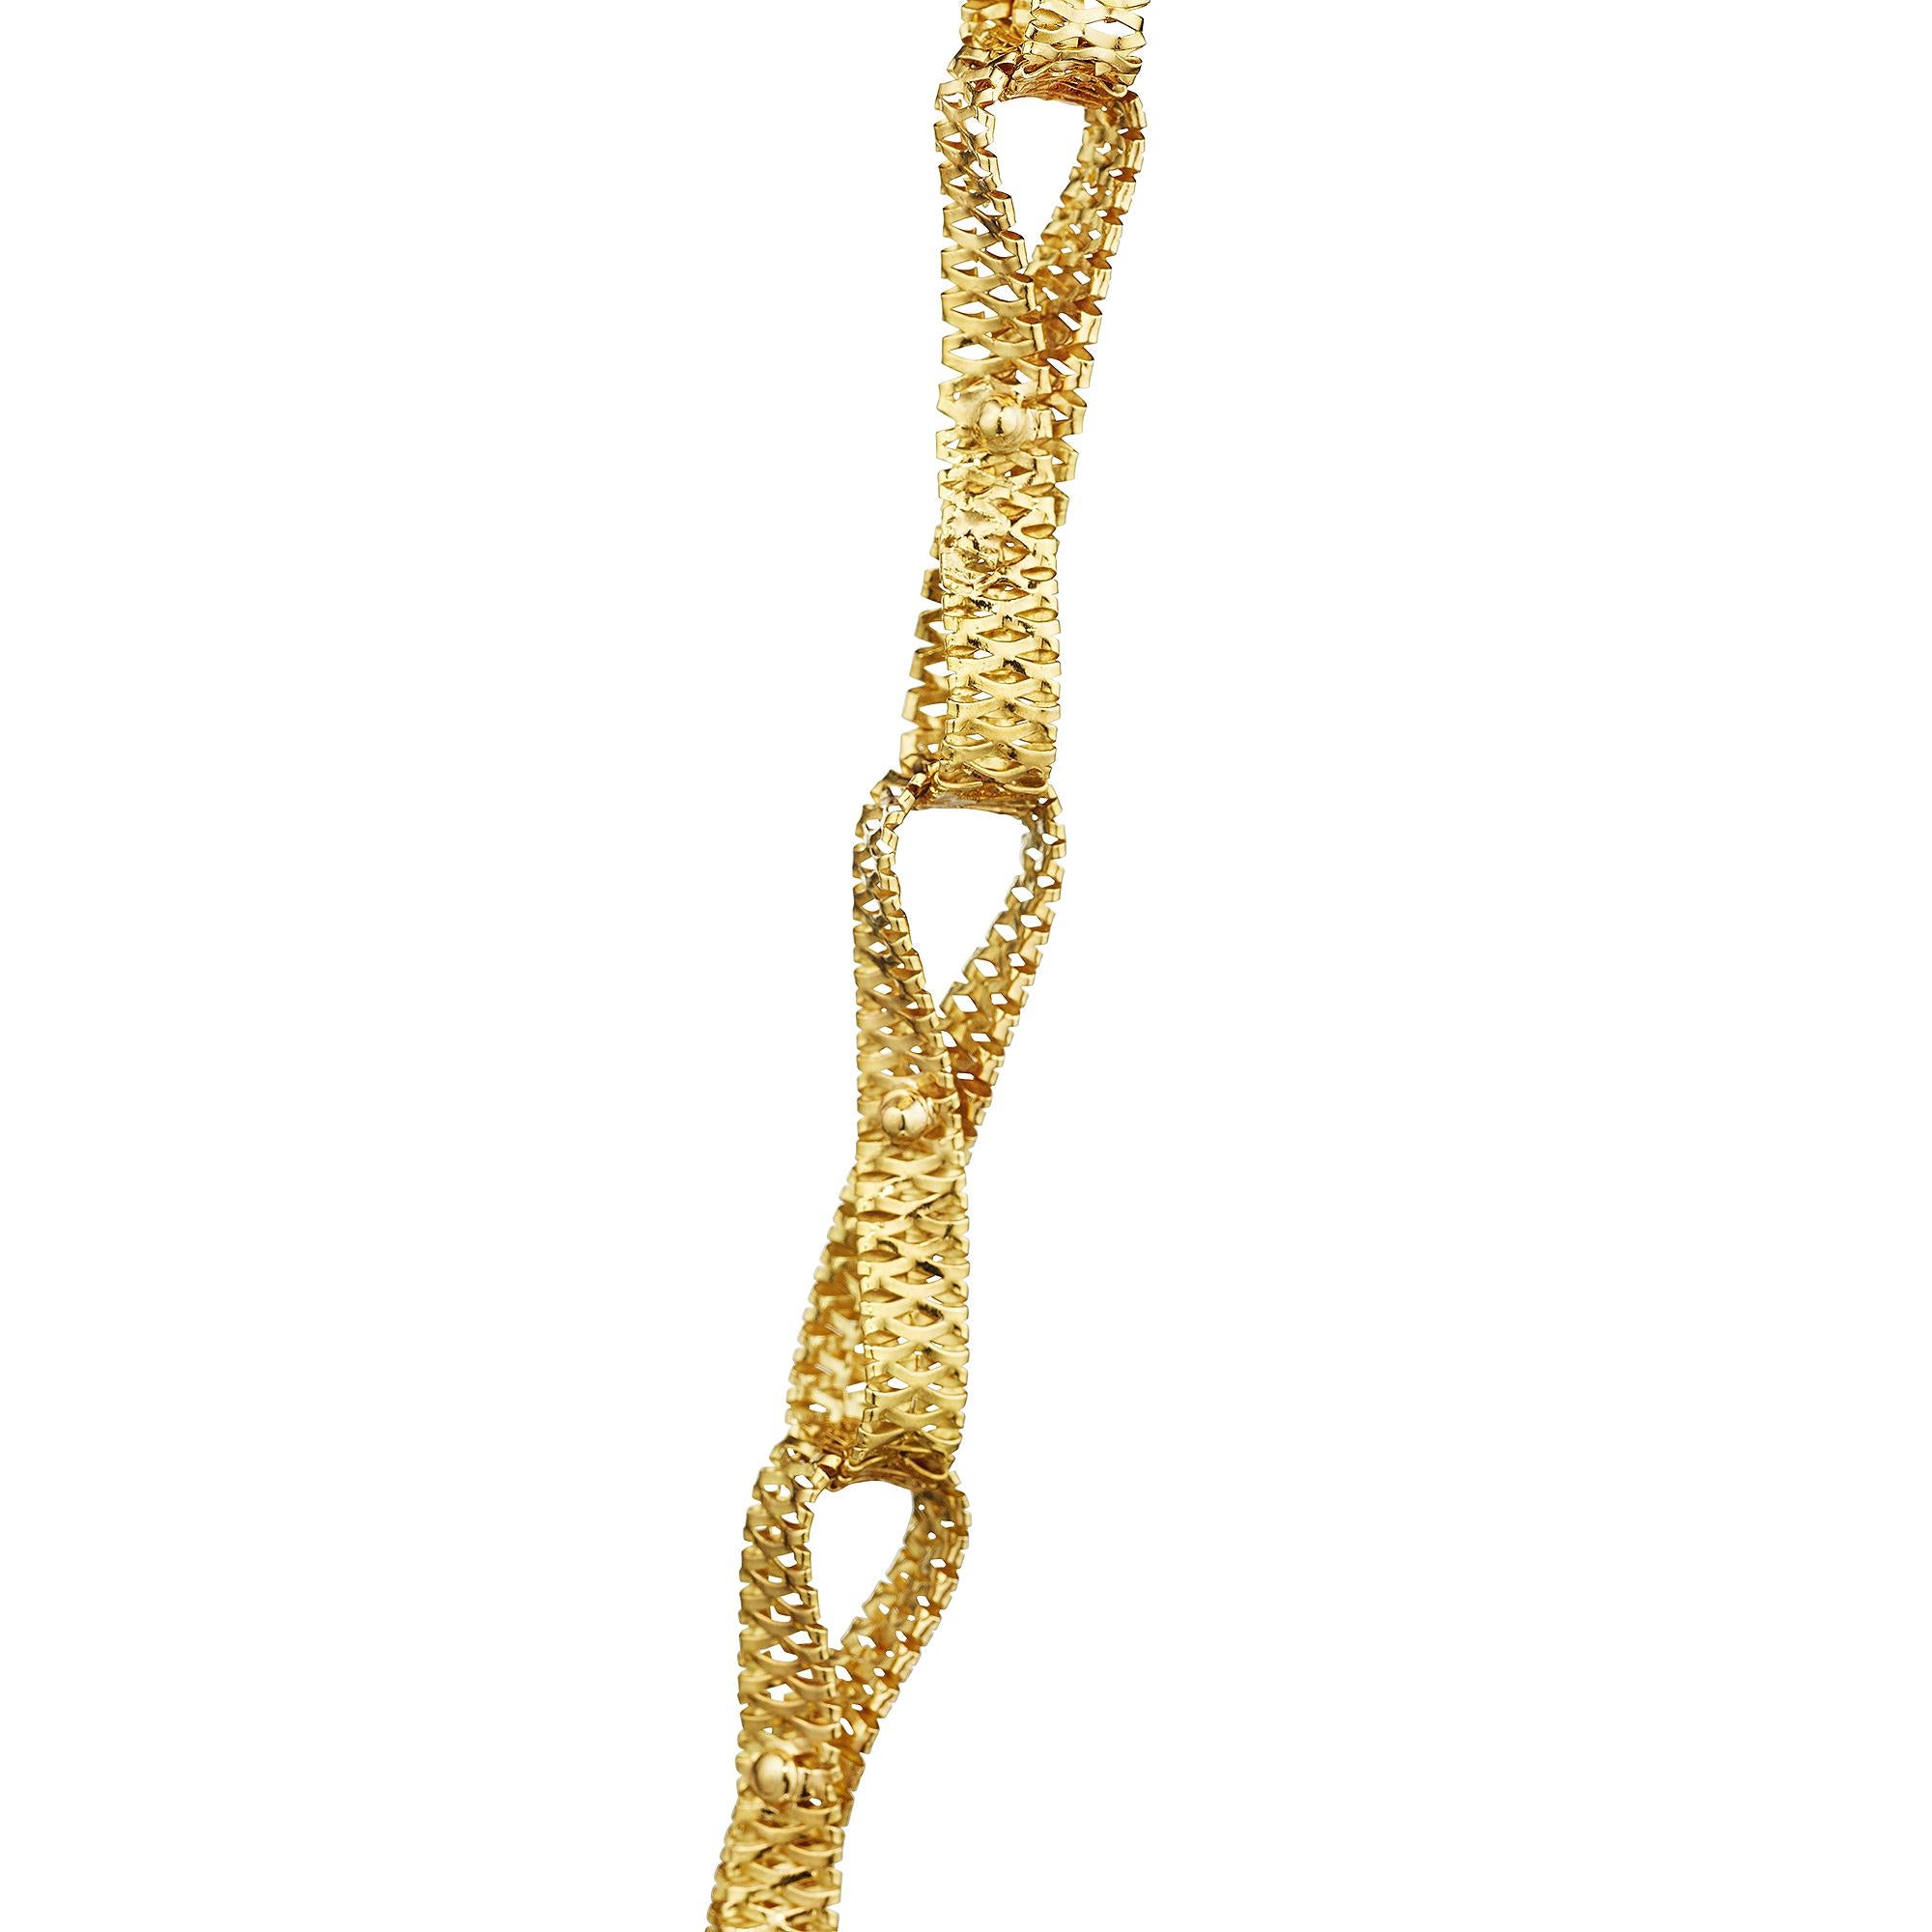 Tie this Van Cleef & Arpels yellow ribbon vintage necklace around neck and you will feel like the gift you are.  Designed as an 18 karat yellow gold basket weave twisted ribbon link, this long and lean designer necklace will become the daily